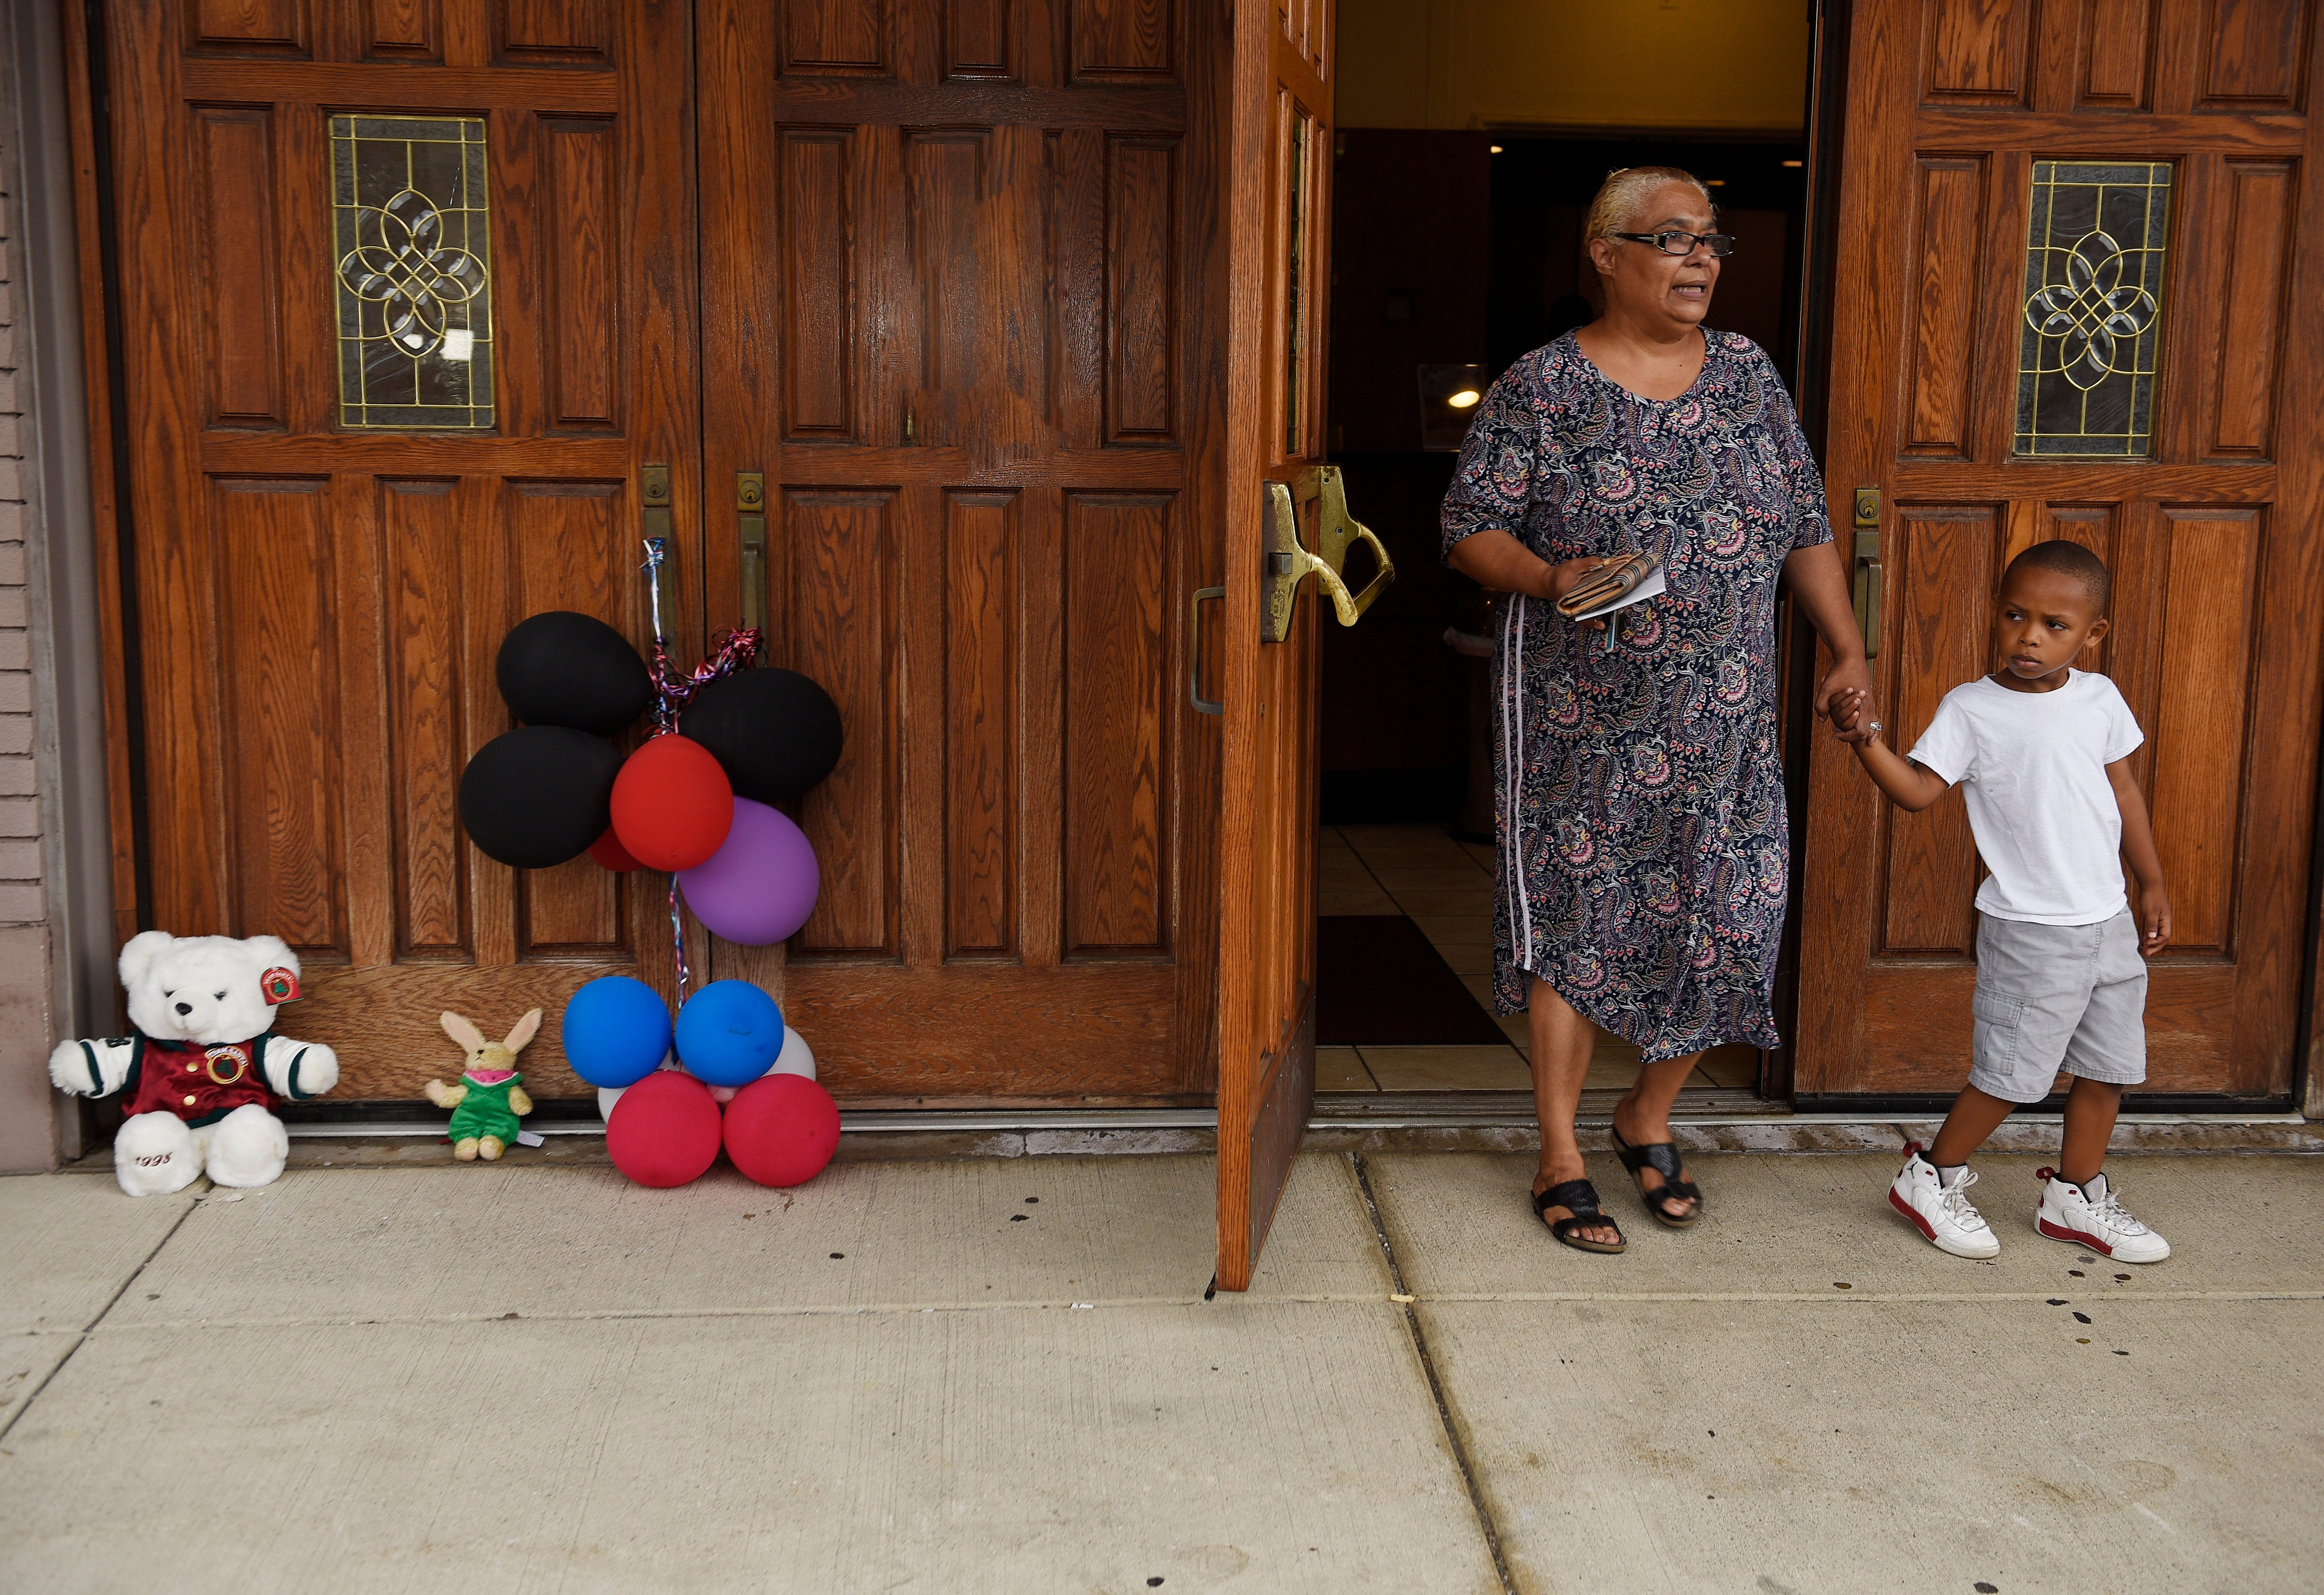 Shelia Laughlin, 58, of Detroit leaves New Bethel Baptist Church with her grandson, Khailon Turner, 5, after dropping off an obituary card for the late Aretha Franklin on Thursday, Aug. 16, 2018, in Detroit.